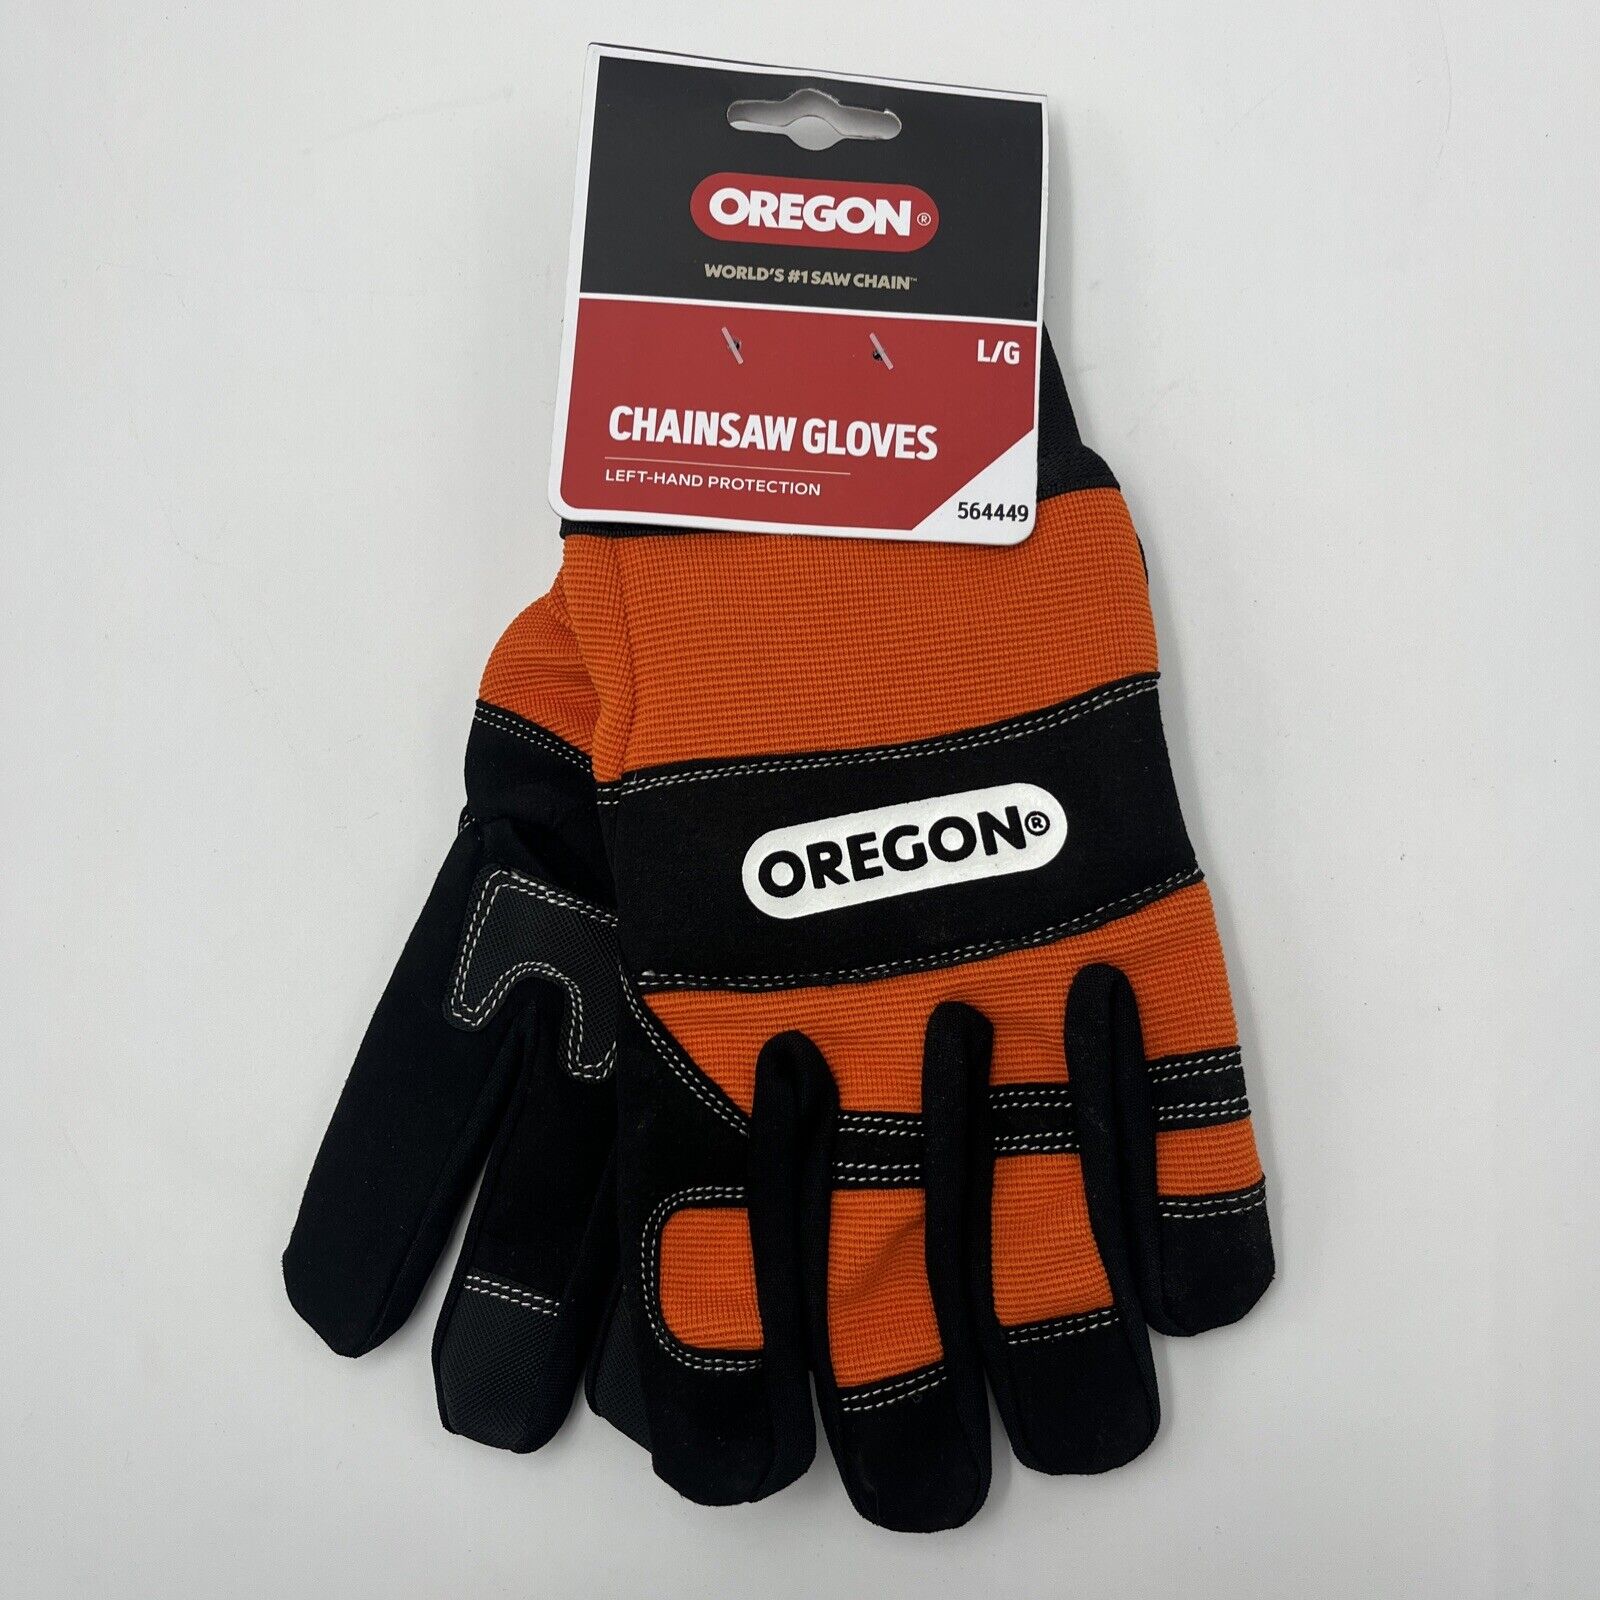 Oregon Chainsaw Gloves Protection 1pair Size Large Left Hand Protection Orange. Available Now for $18.99